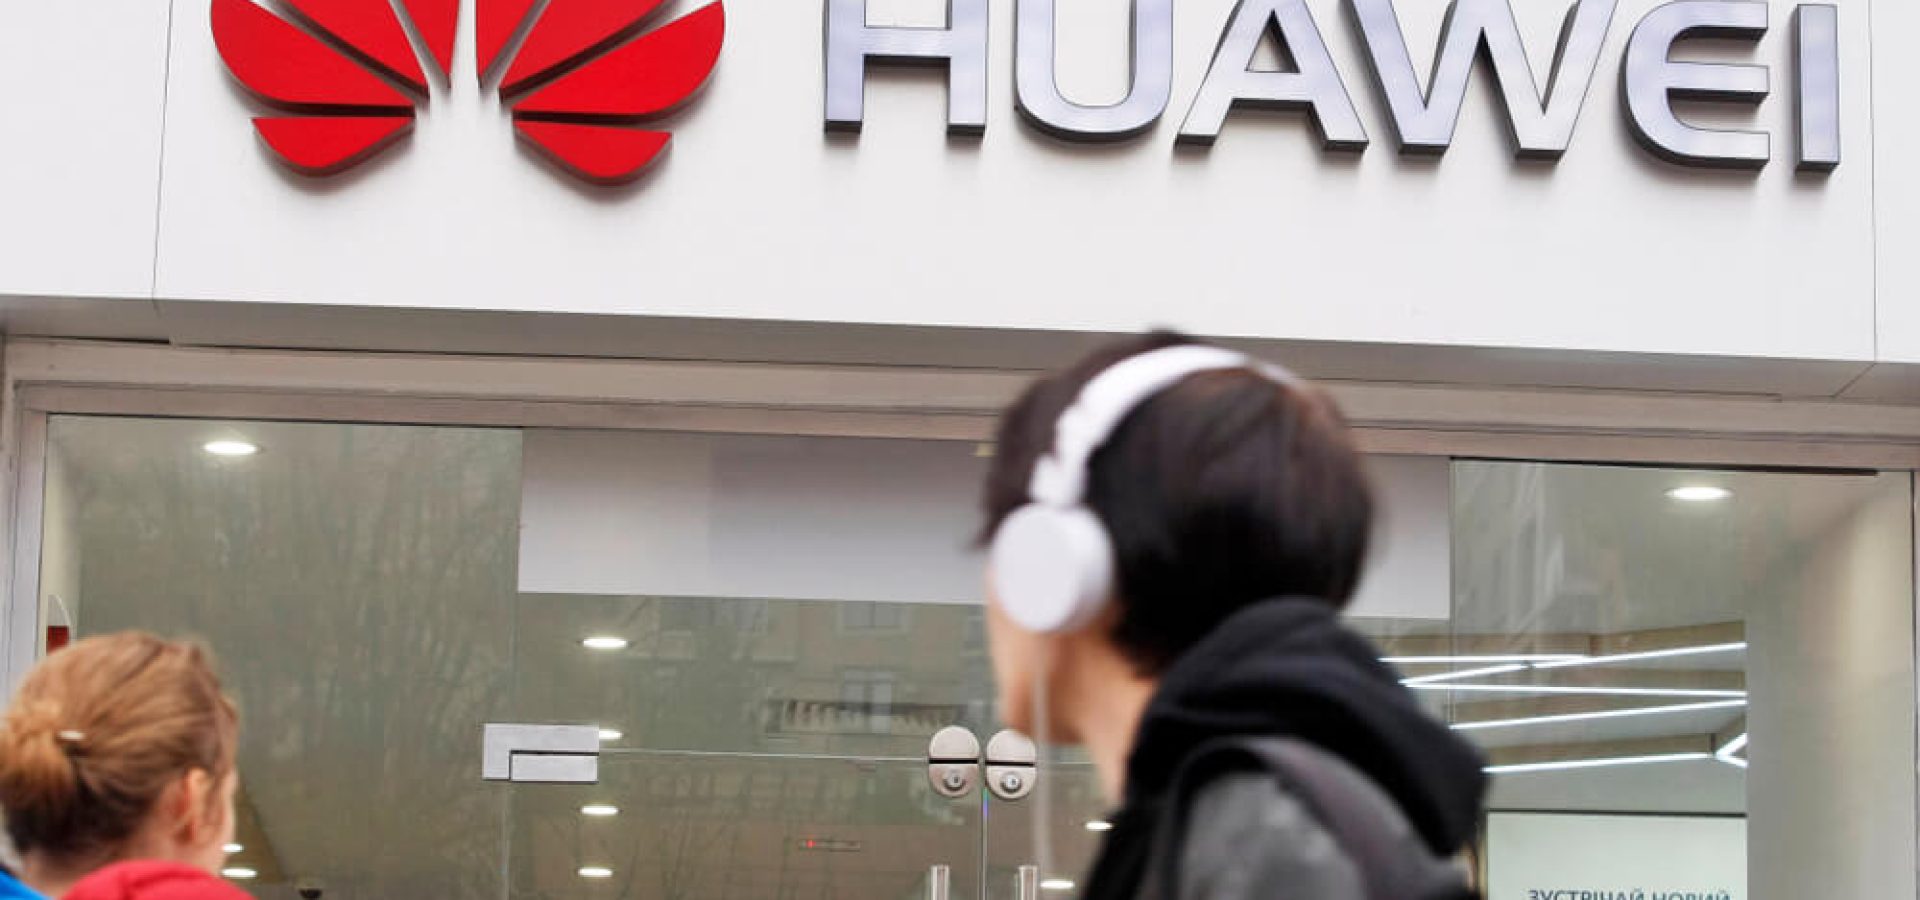 Wibest-Huawei: A man appears to look at the logo of Huawei.